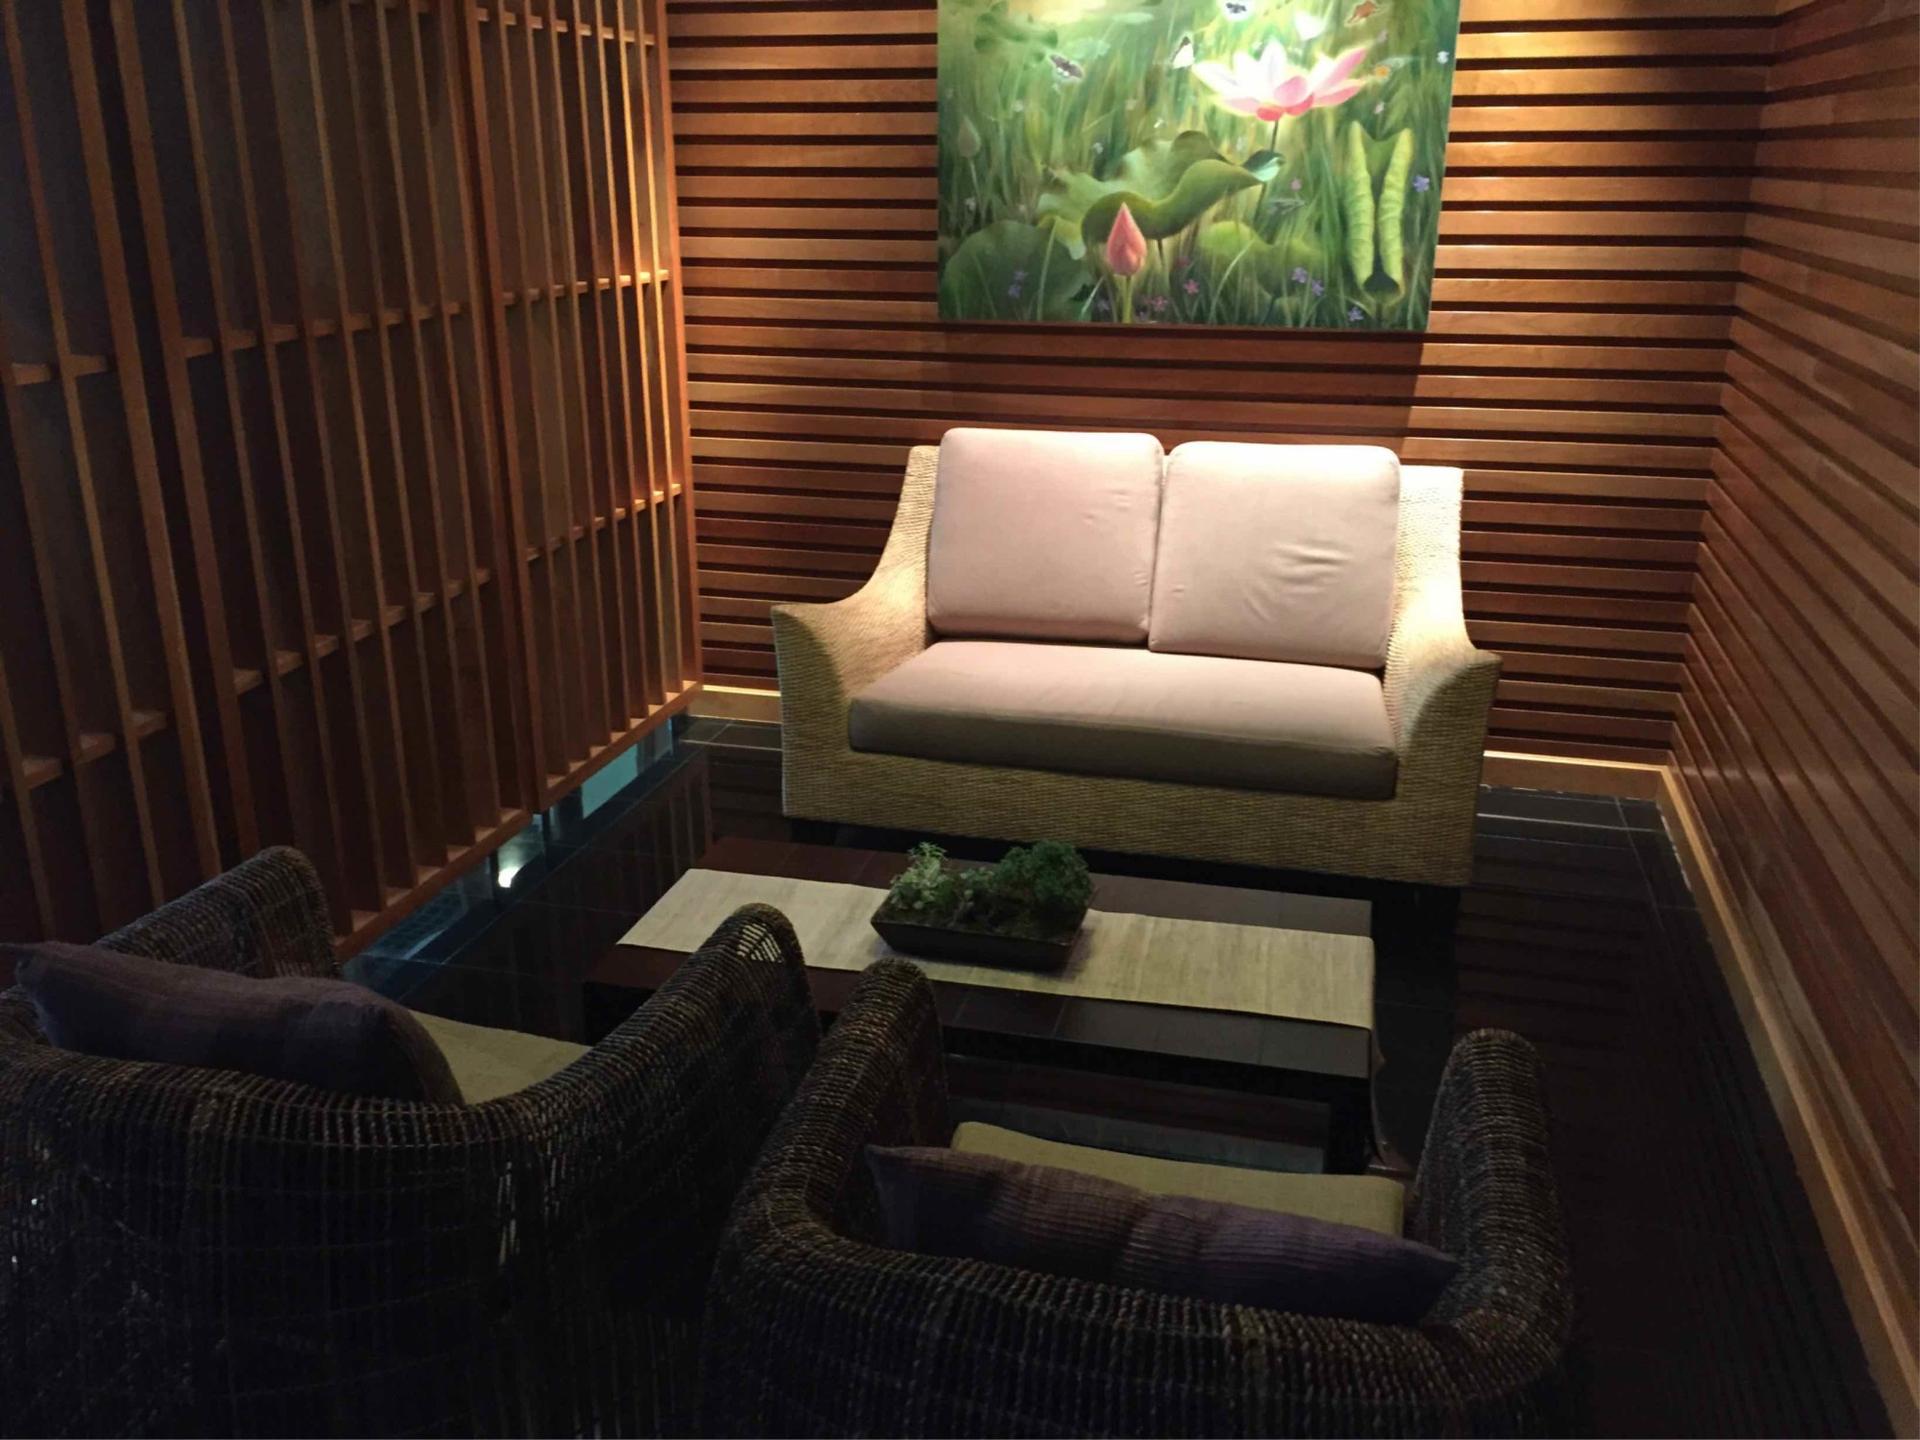 Thai Airways Royal Orchid Spa  image 19 of 25